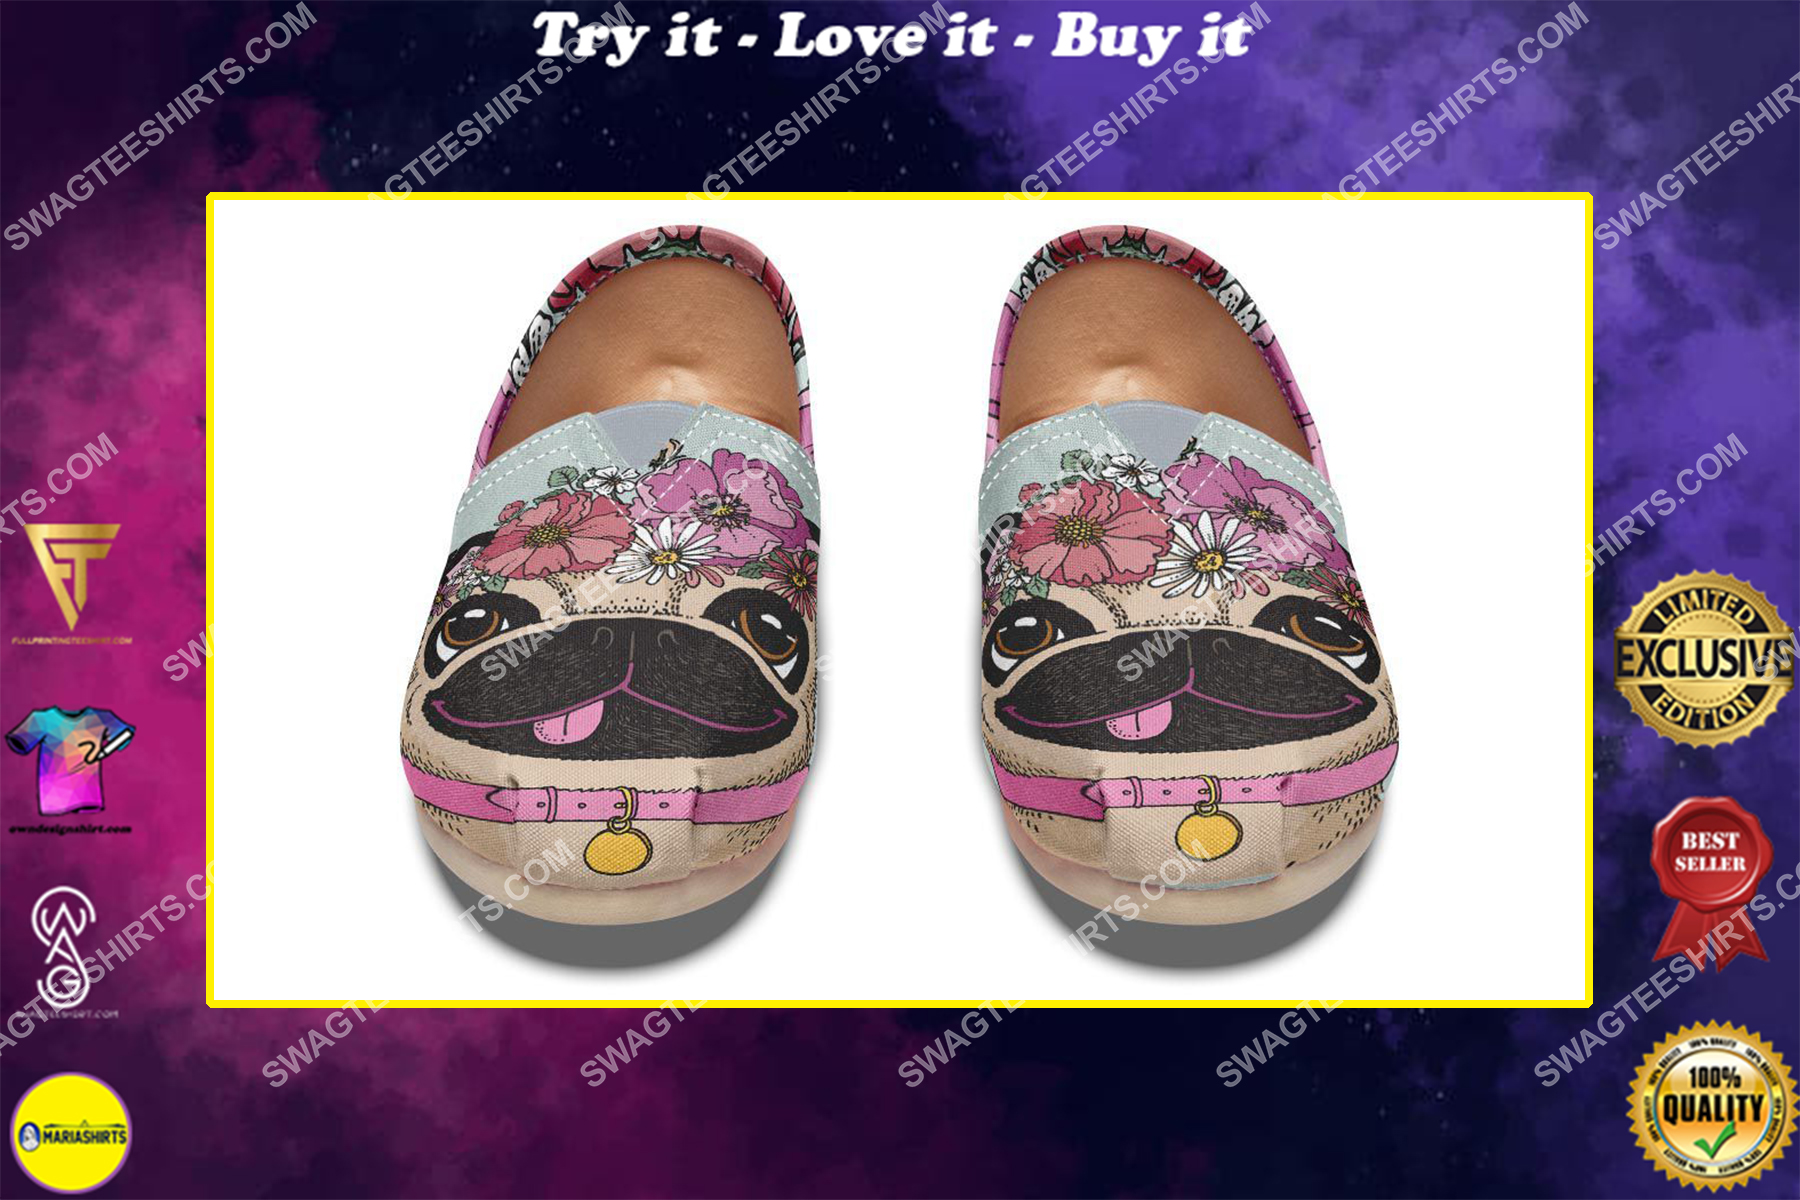 floral pug dogs lover all over printed toms shoes